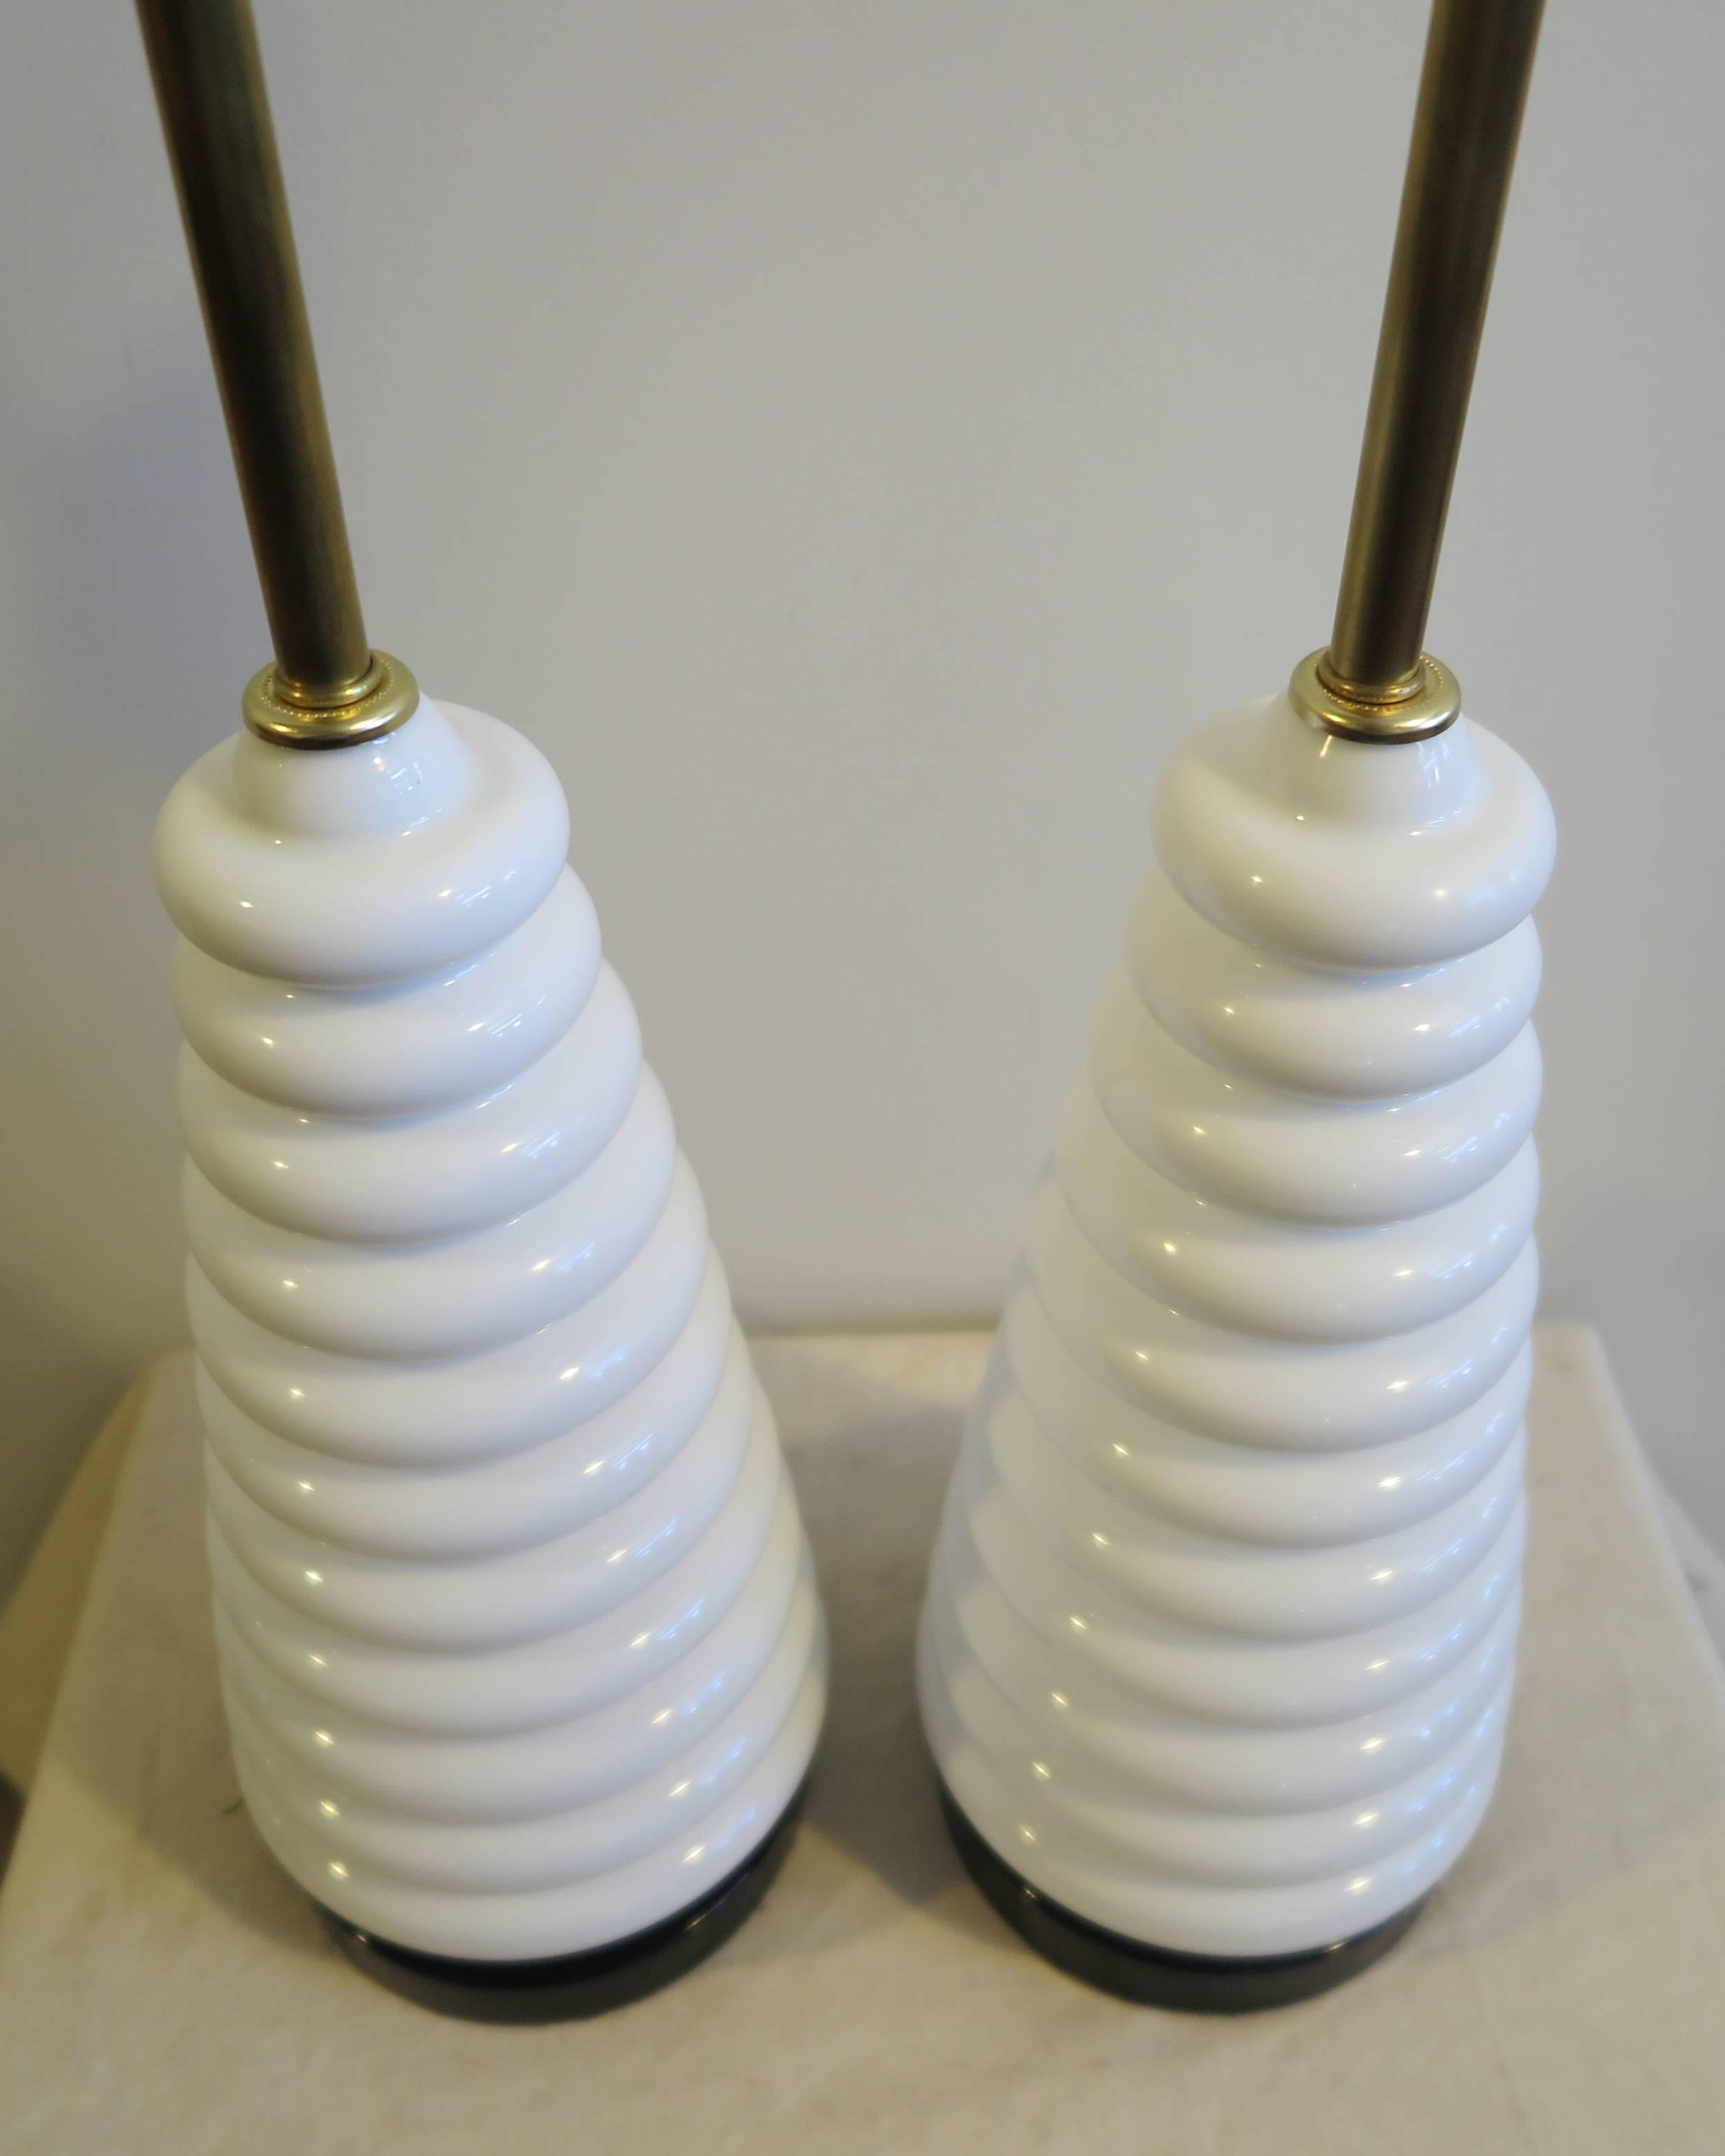 A pair of Mazzega glass lamps attributed to Carlo Nason. Italian blown white glass table lamps. Excellent condition.